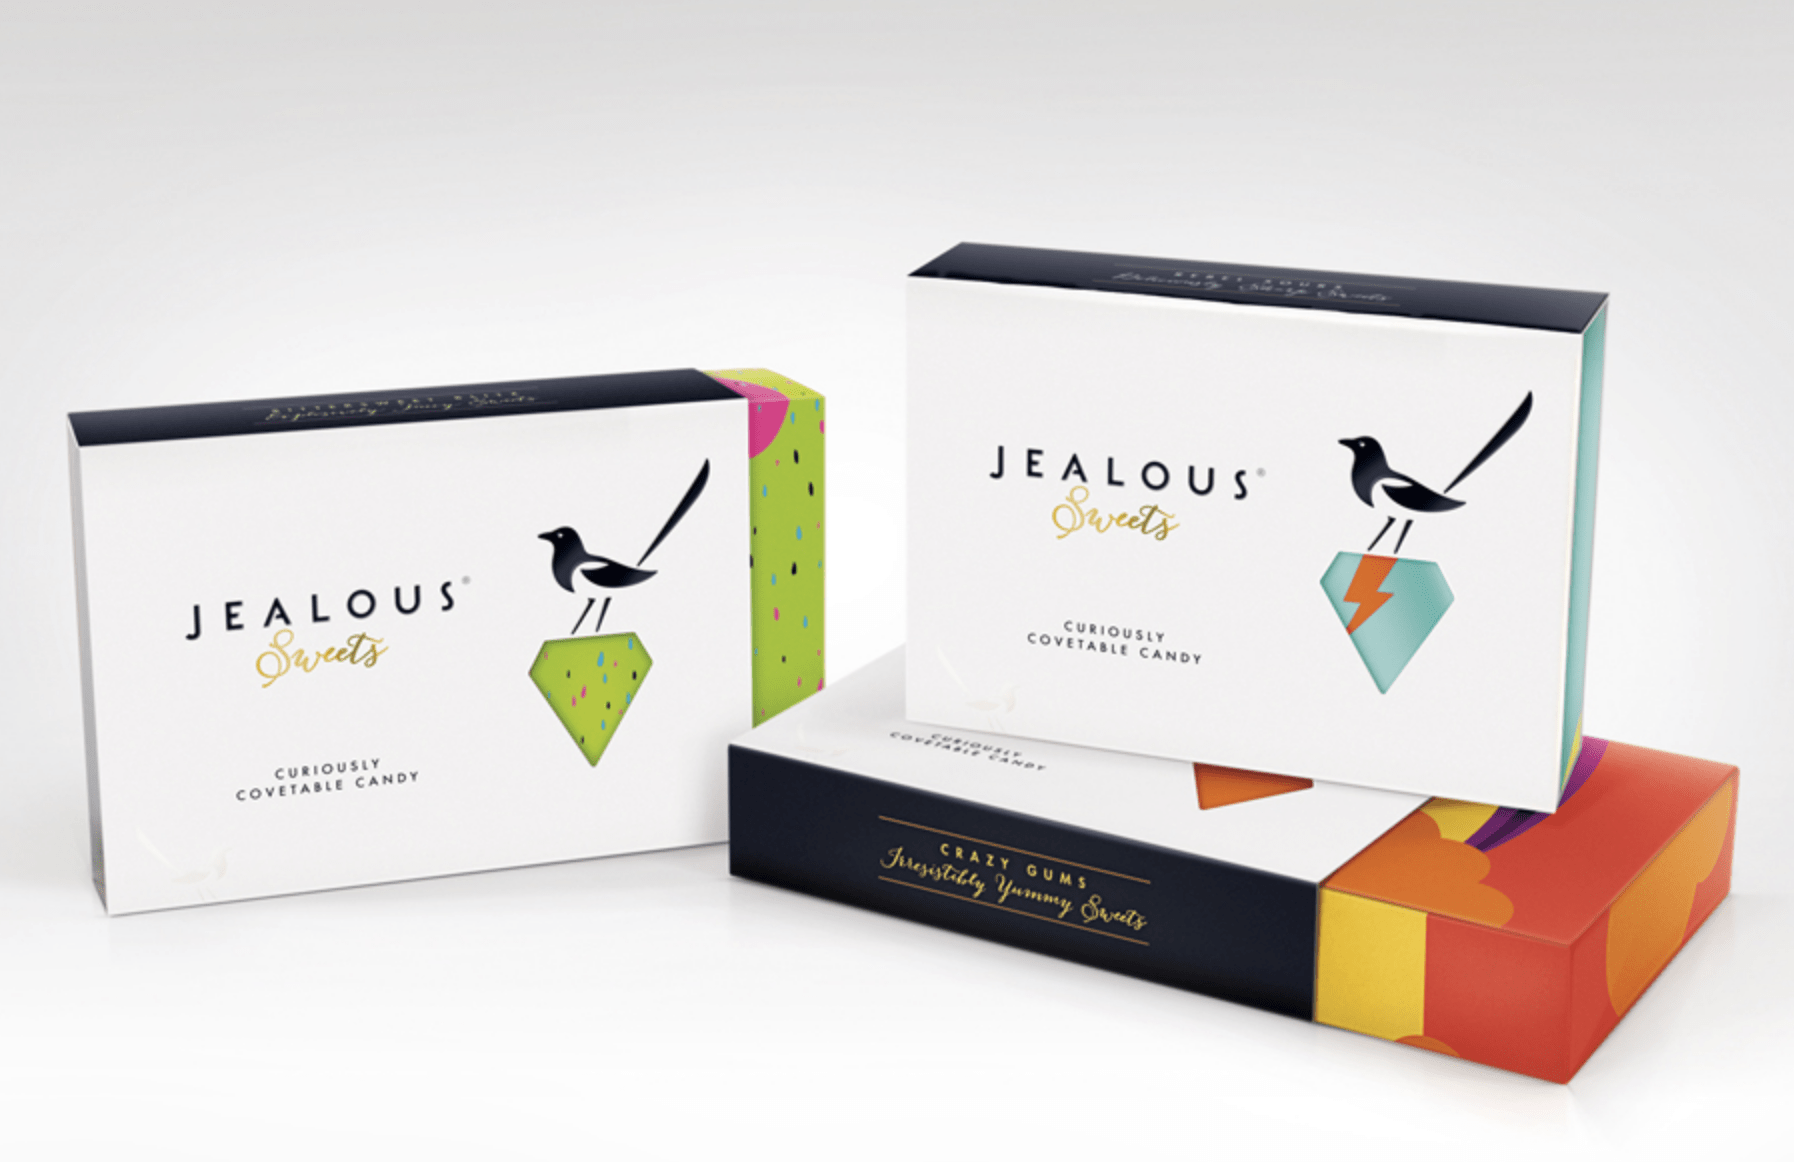 Packaging marque Jealous 1